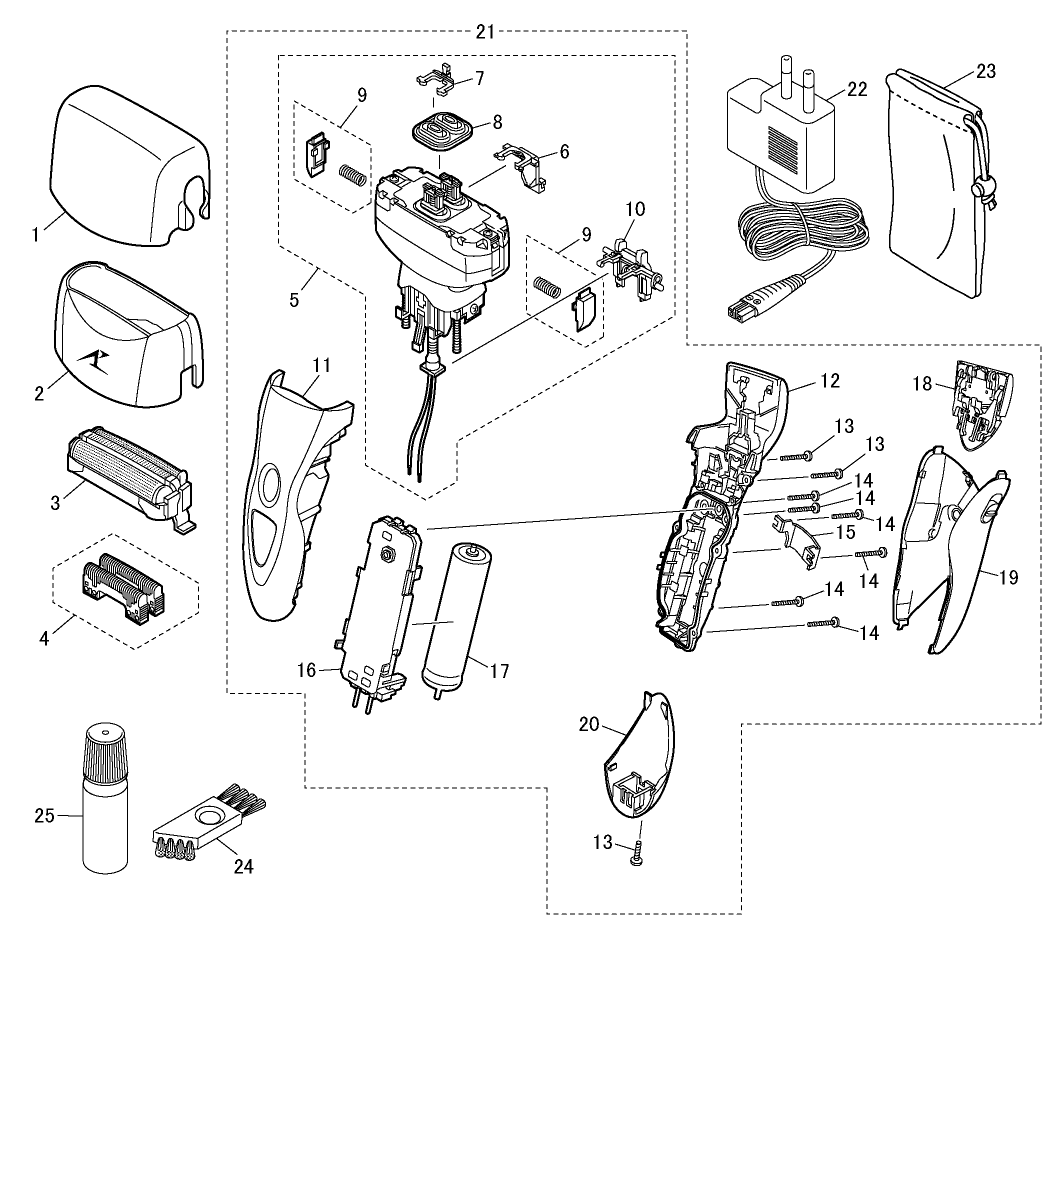 ES-8101: Exploded View